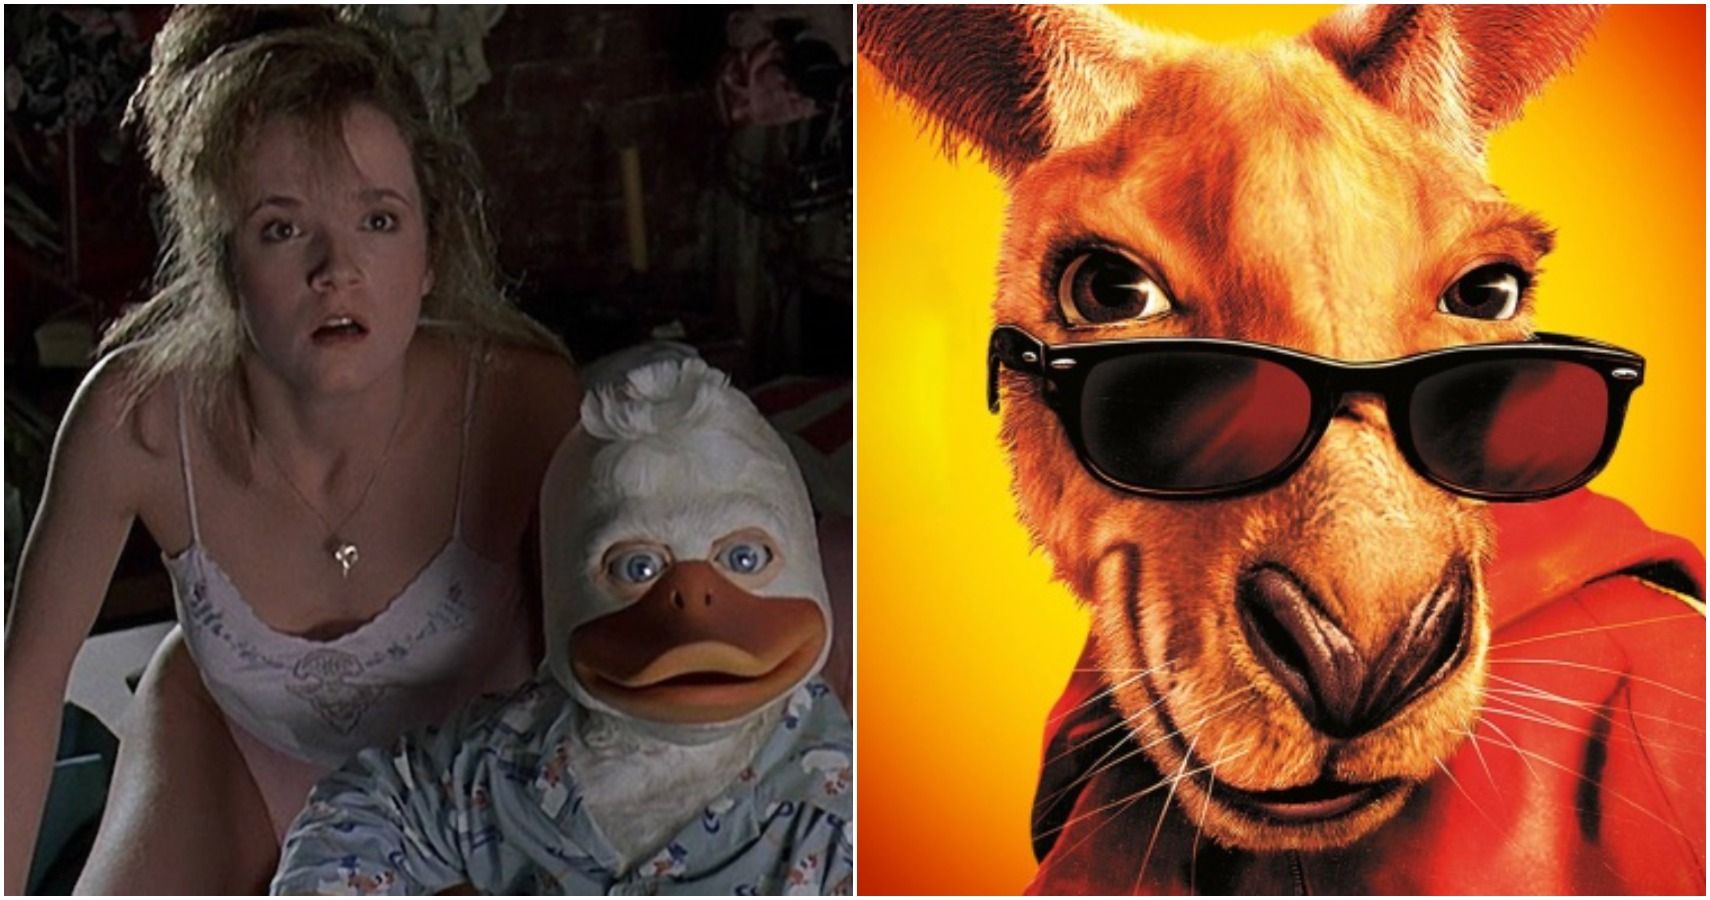 Howard the Duck & 9 Other Family Films That Were Much Darker Than Advertised